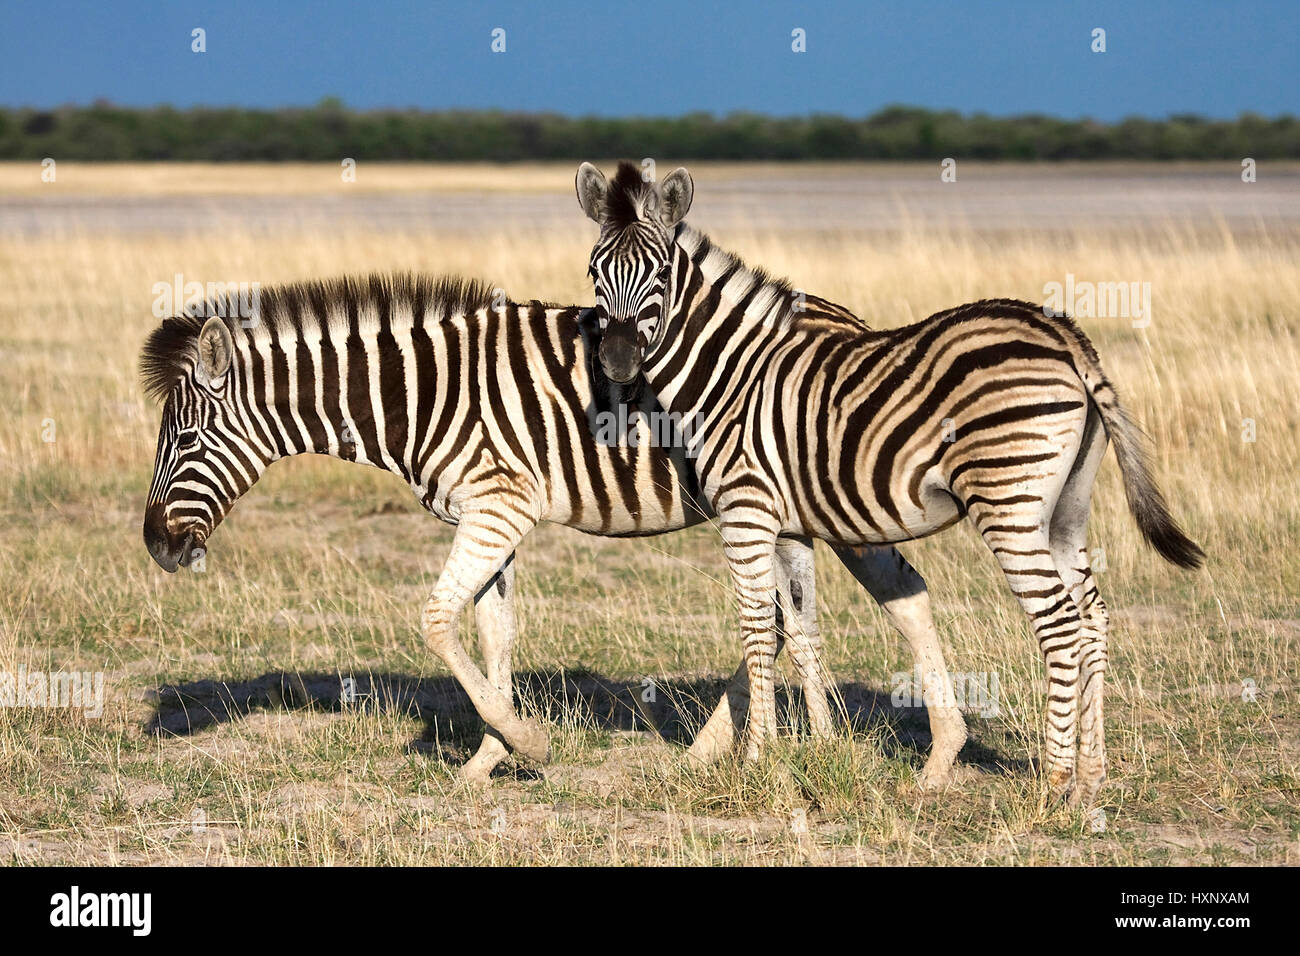 Tiere In Der Steppe High Resolution Stock Photography and Images - Alamy